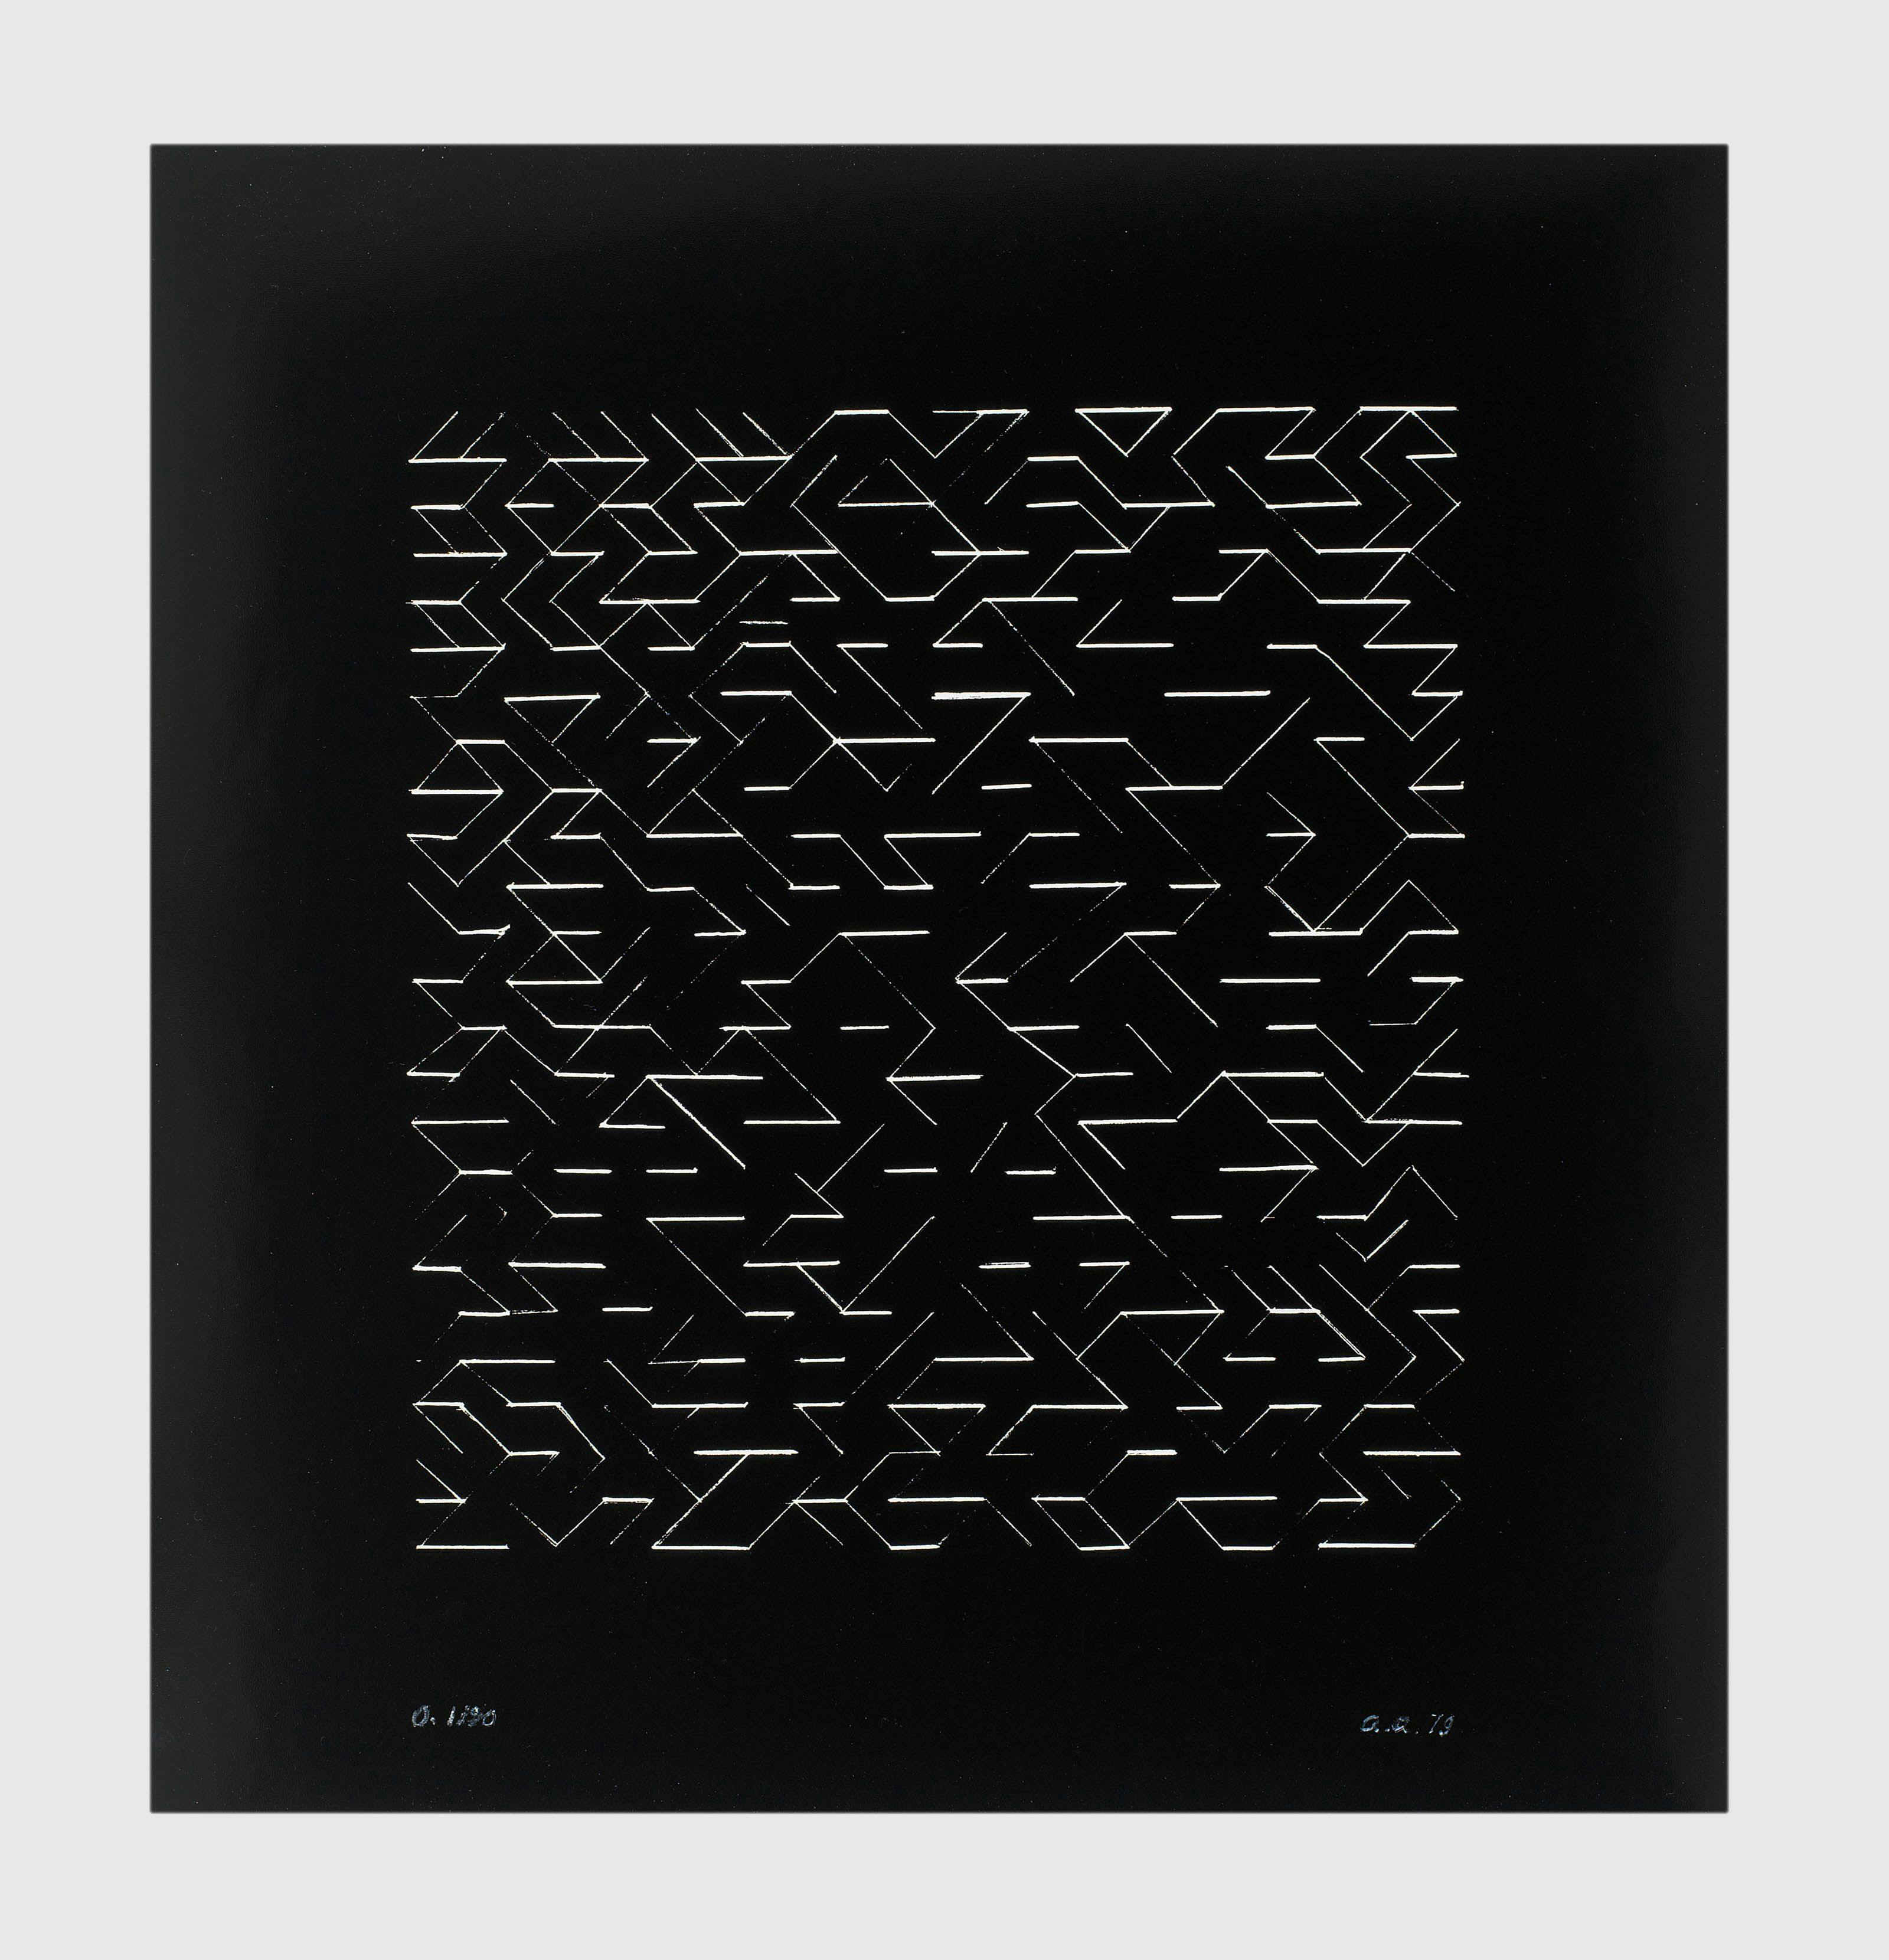 A print by Anni Albers, titled Orchestra, dated 1979.